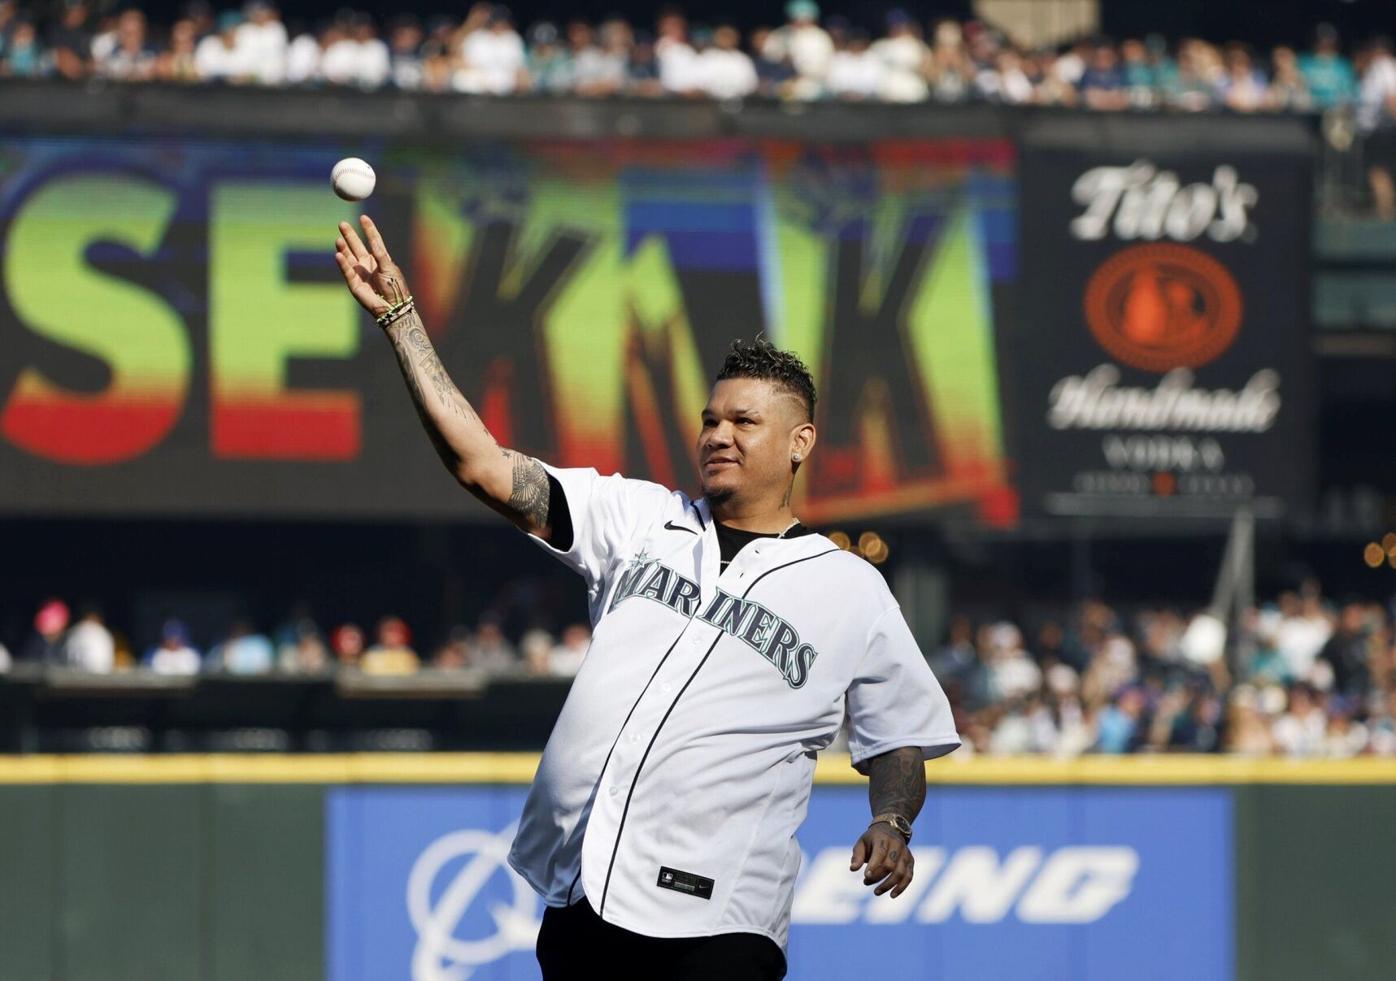 Felix Hernandez to be inducted into Mariners Hall of Fame, Mariners